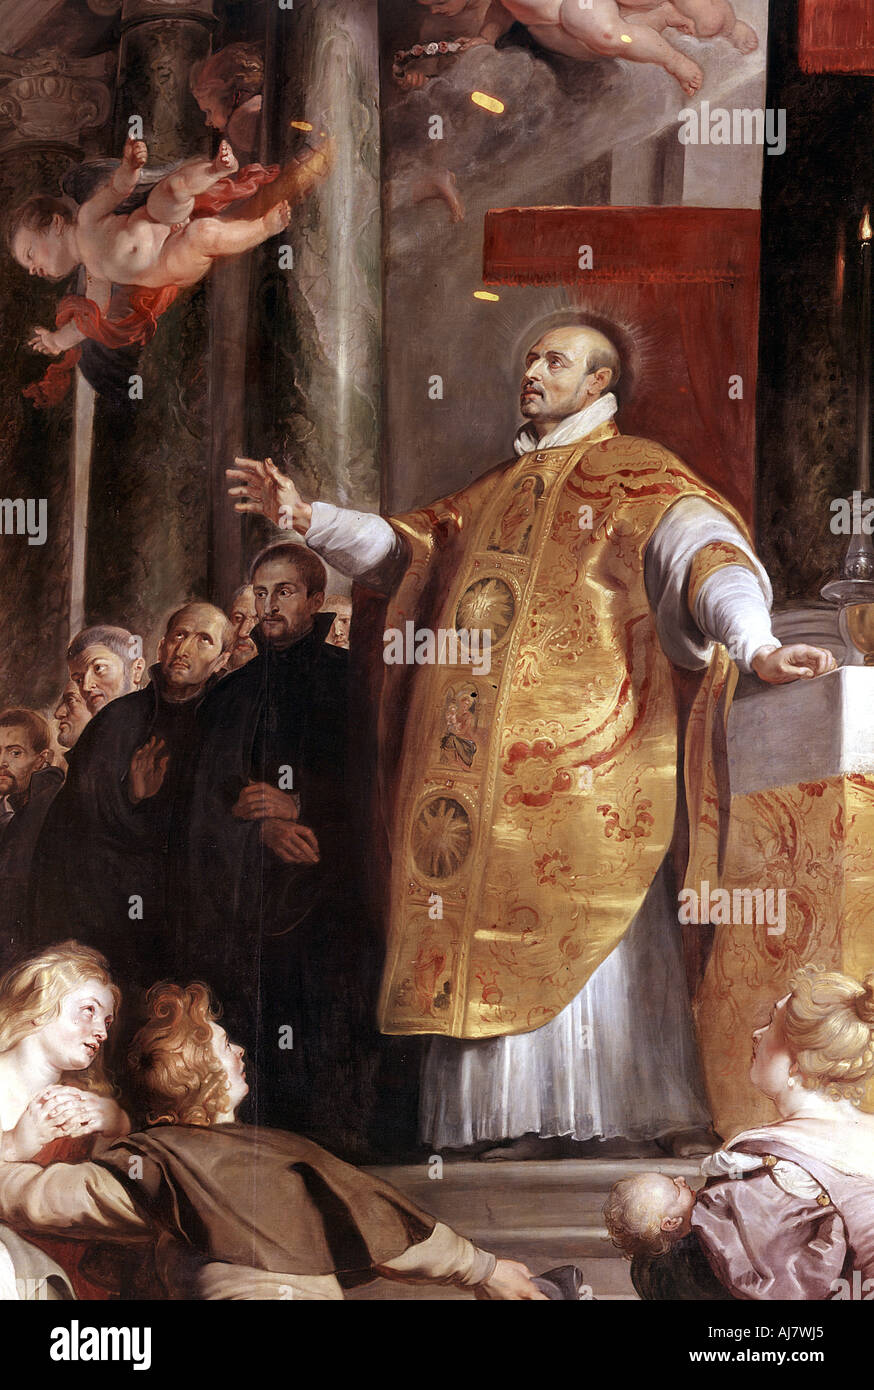 St Ignatius of Loyola, 16th century Spanish soldier and founder of the Jesuits, 1617-1618. Artist: Peter Paul Rubens Stock Photo